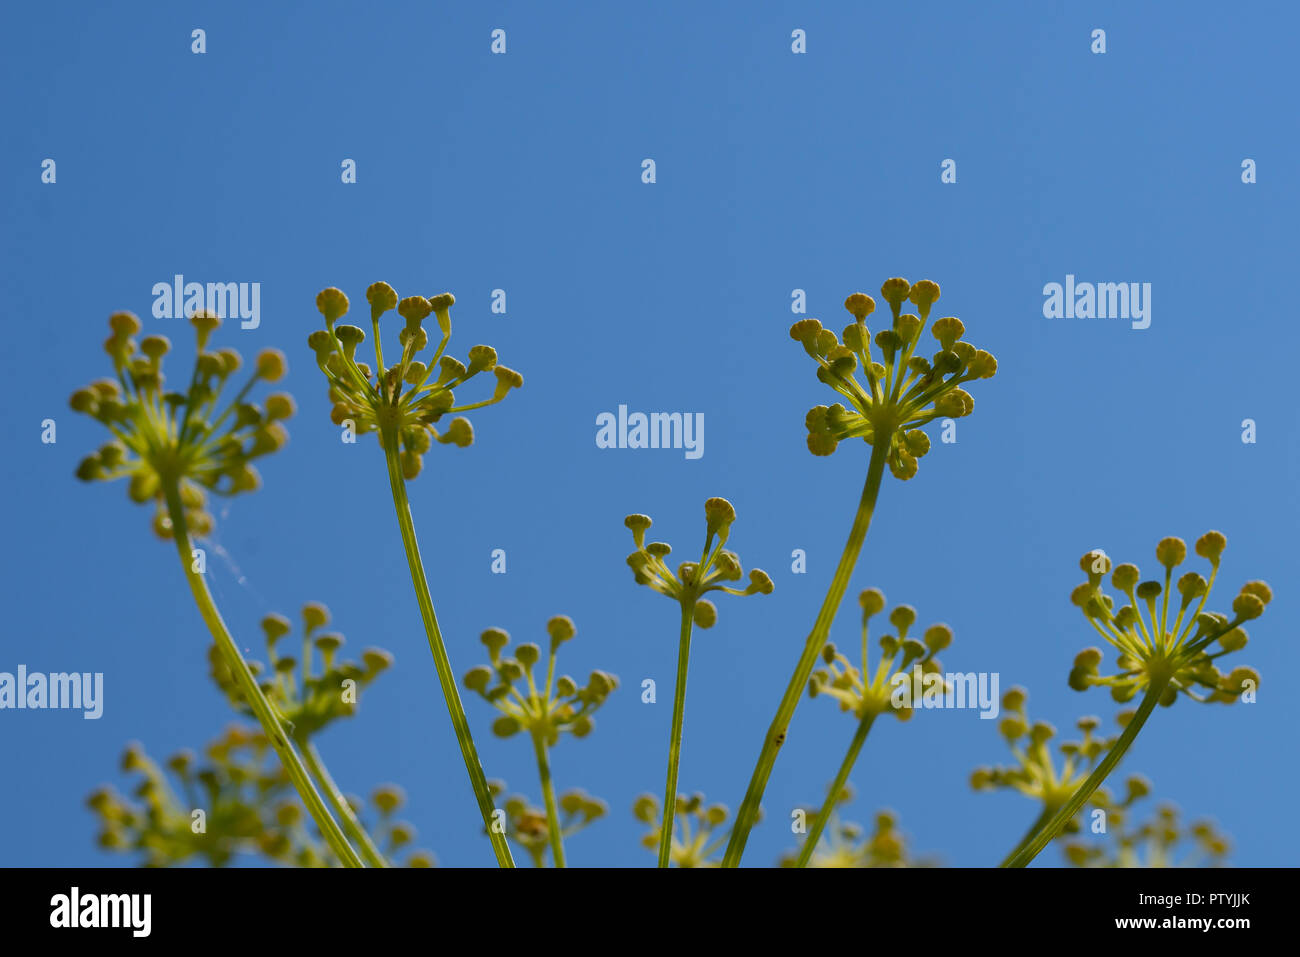 Close Up Of Fennel Flowers On Blue Sky Background Stock Photo Alamy